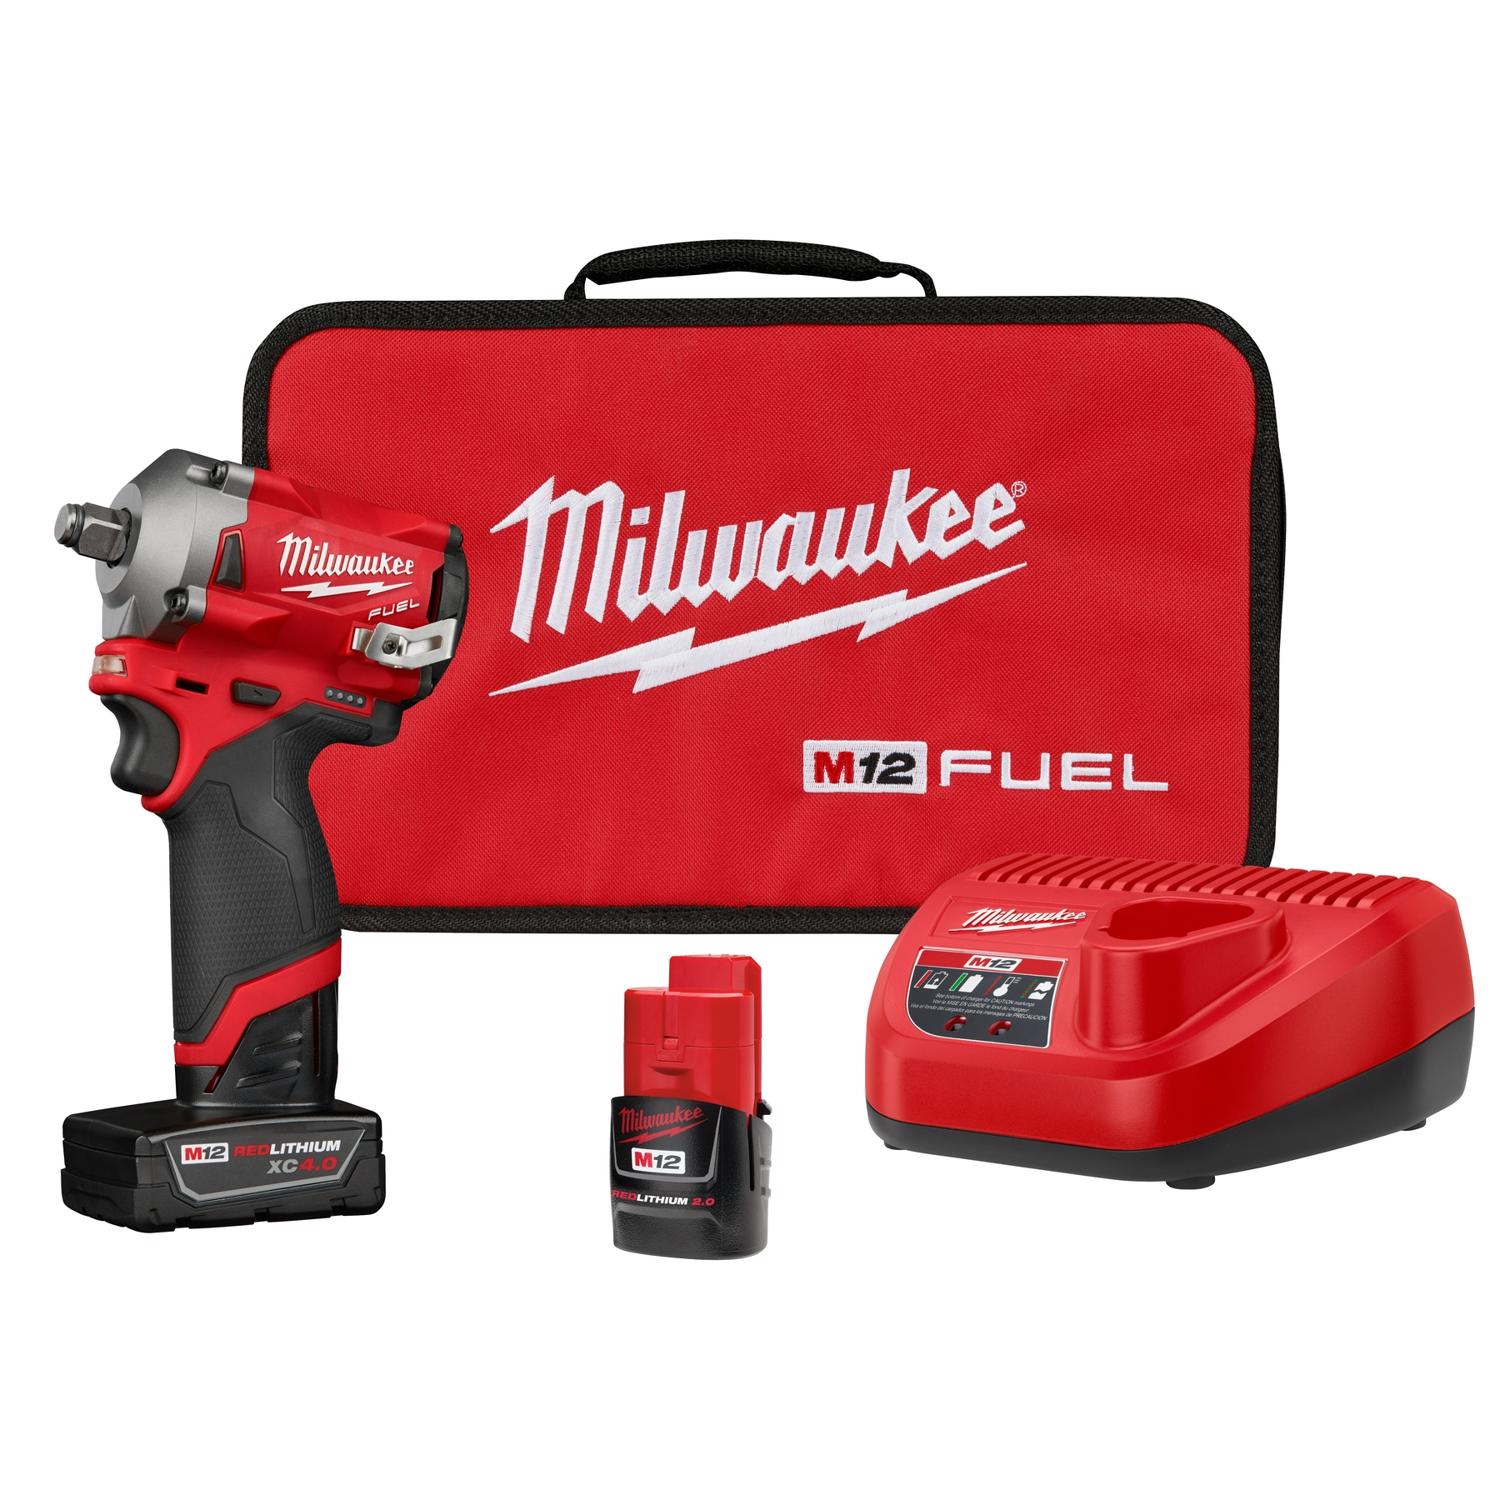 Photos - Drill / Screwdriver Milwaukee M12 FUEL 1/2 in. Cordless Brushless Stubby Impact Wrench Kit (Ba 